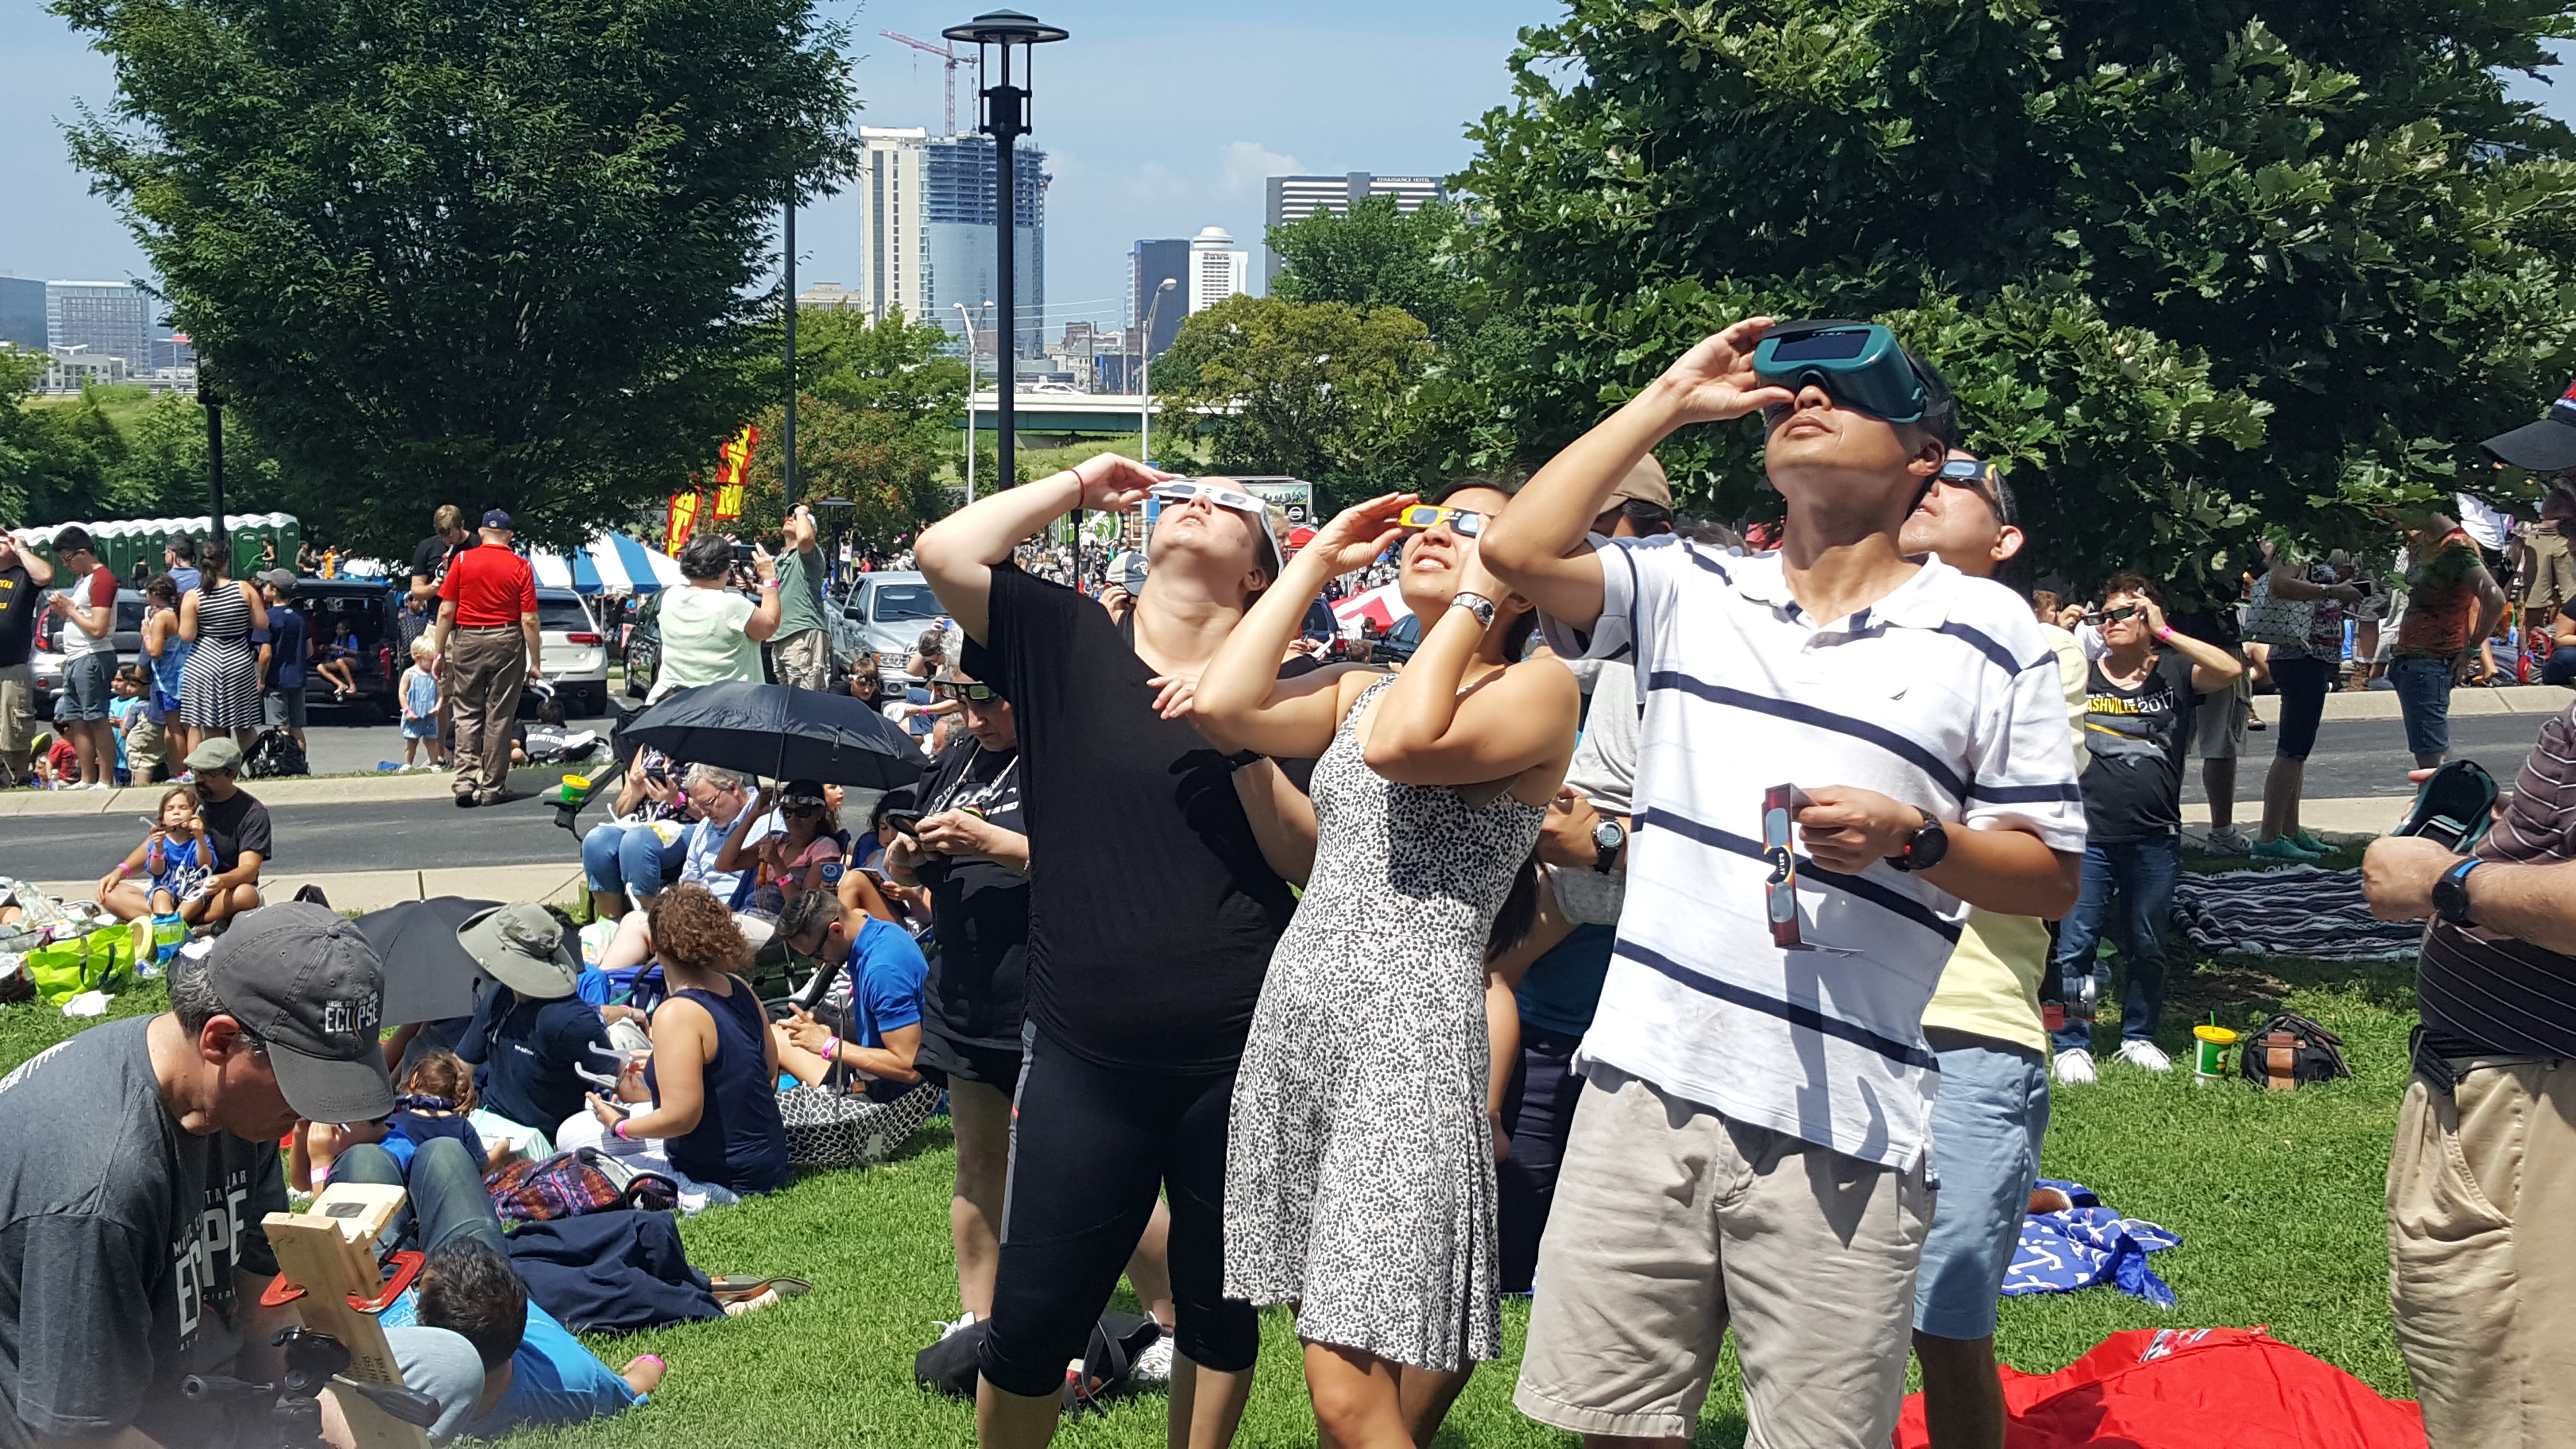 Skywatchers use eclipse glasses to safely observe the total solar eclipse of Aug. 21, 2017, in Nashville, Tennessee.